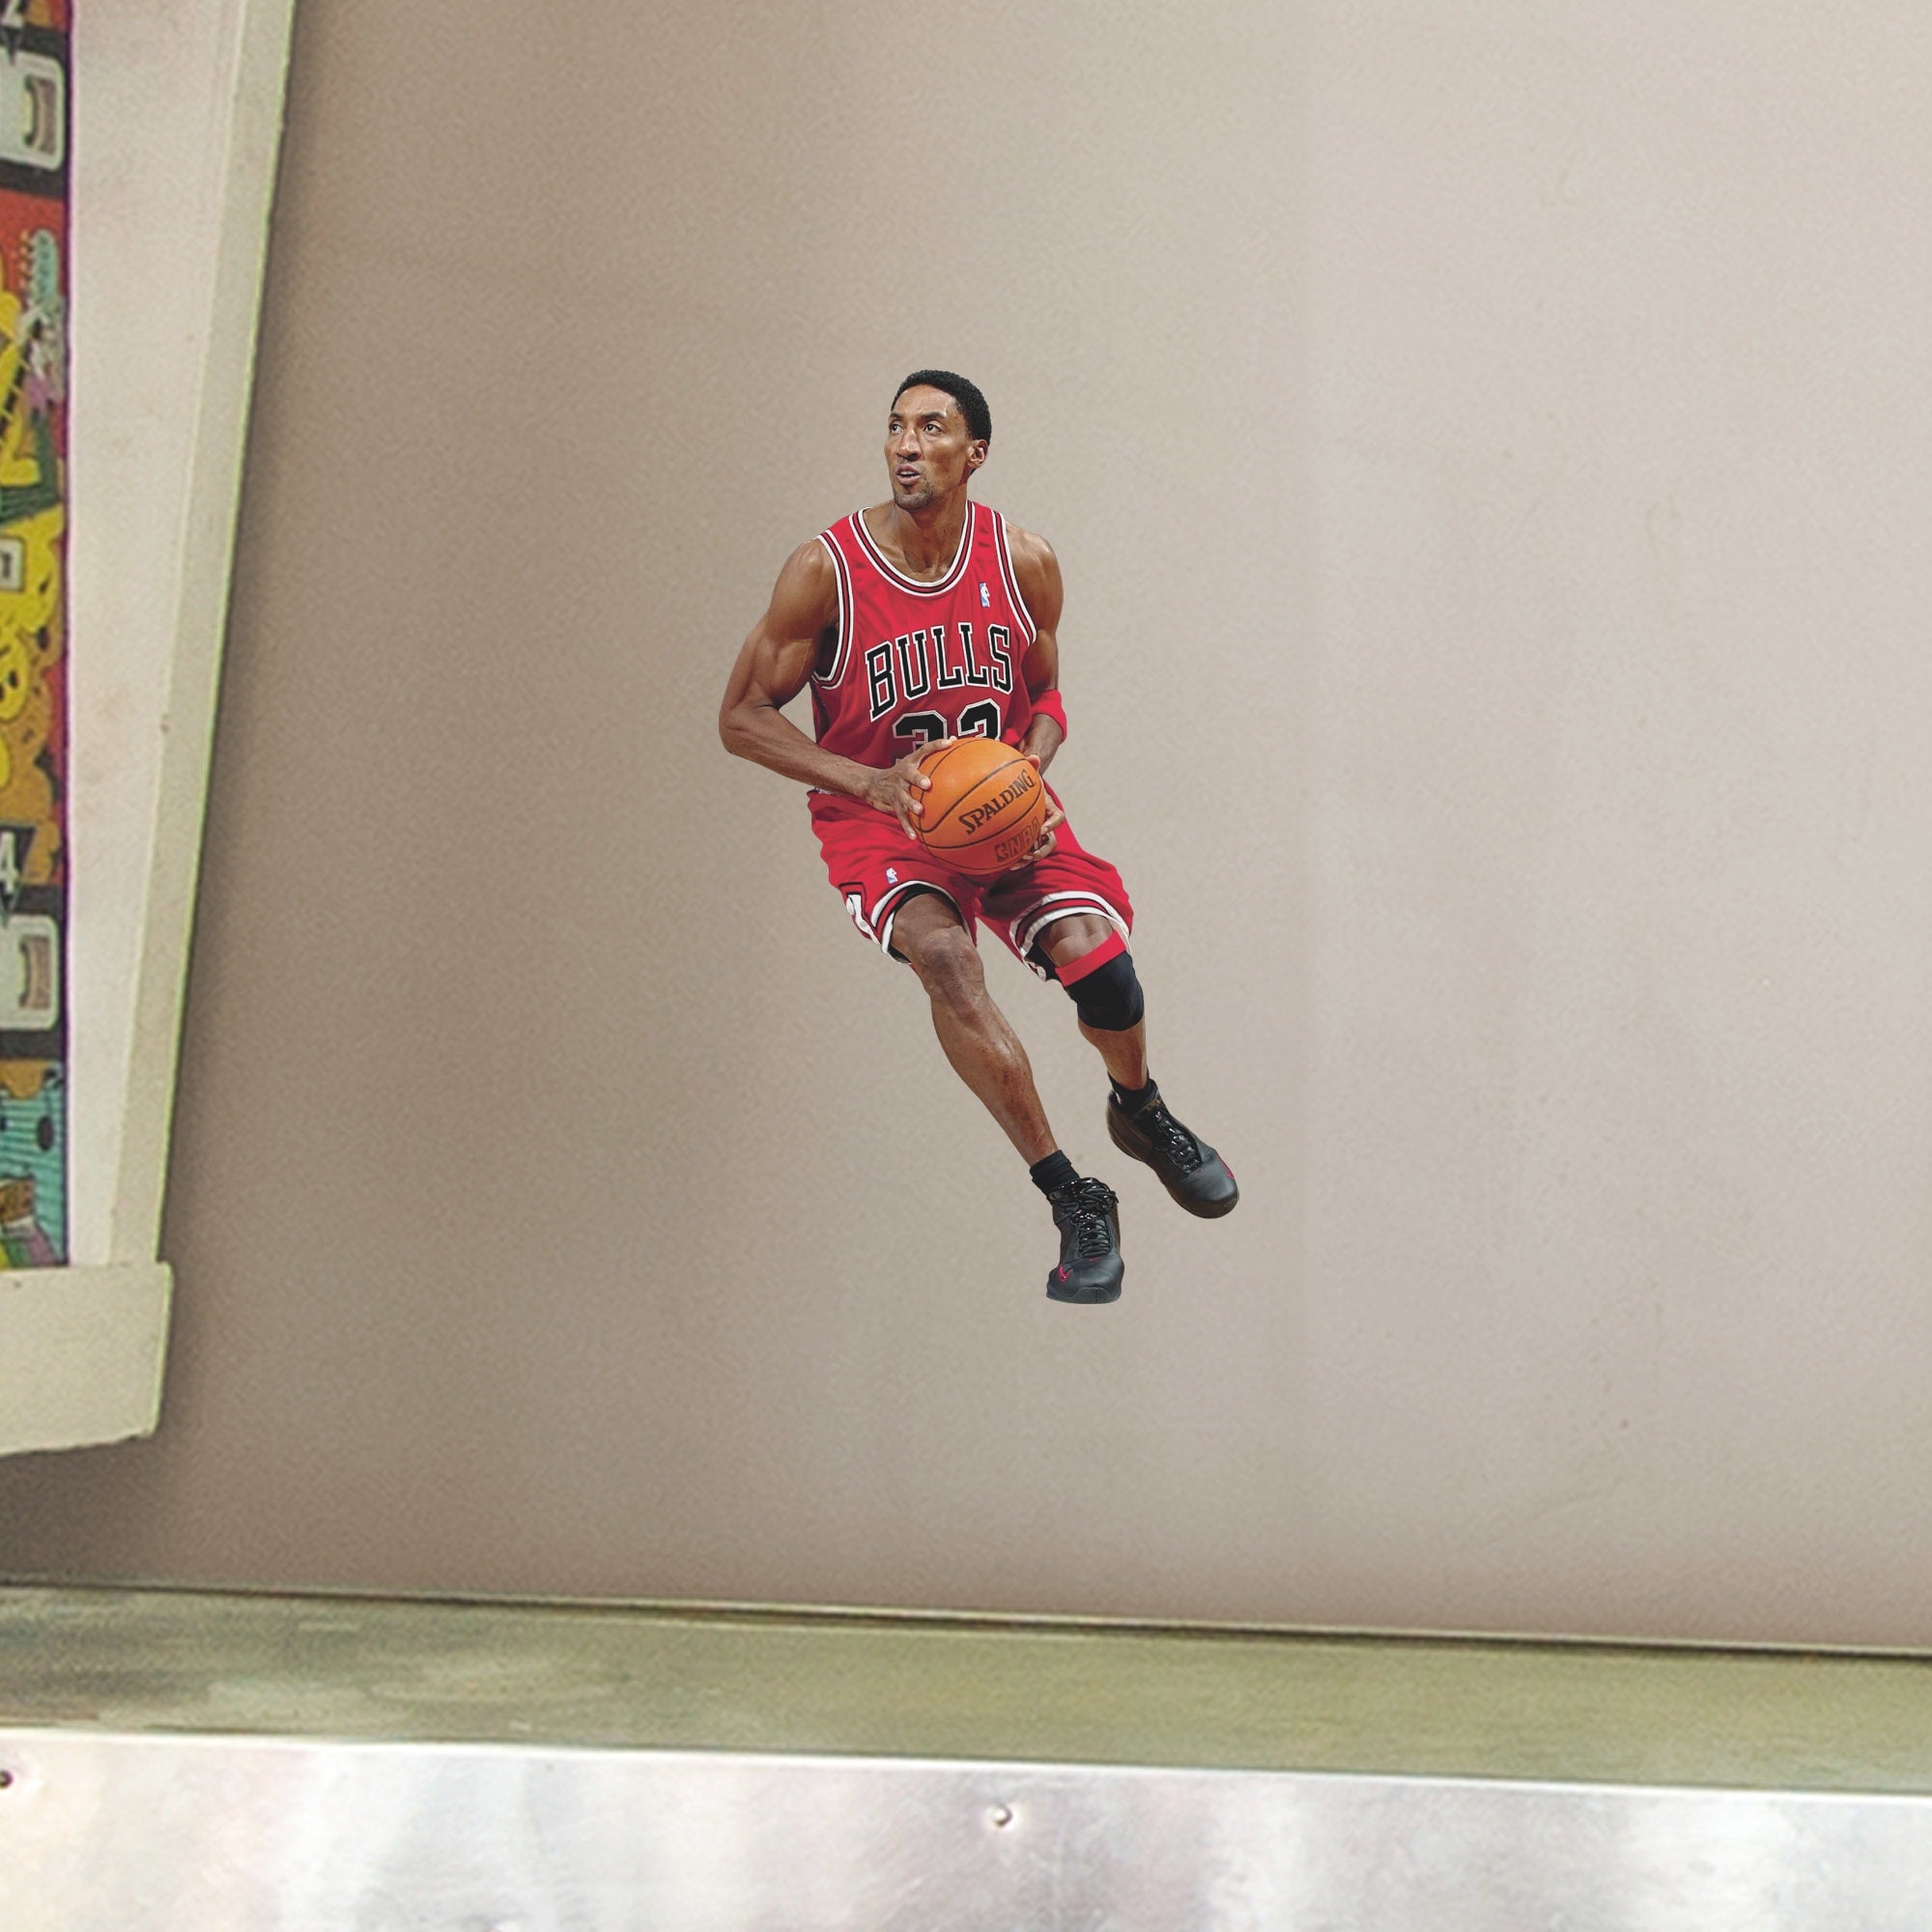 Scottie Pippen for Chicago Bulls - Officially Licensed NBA Removable Wall Decal Large by Fathead | Vinyl